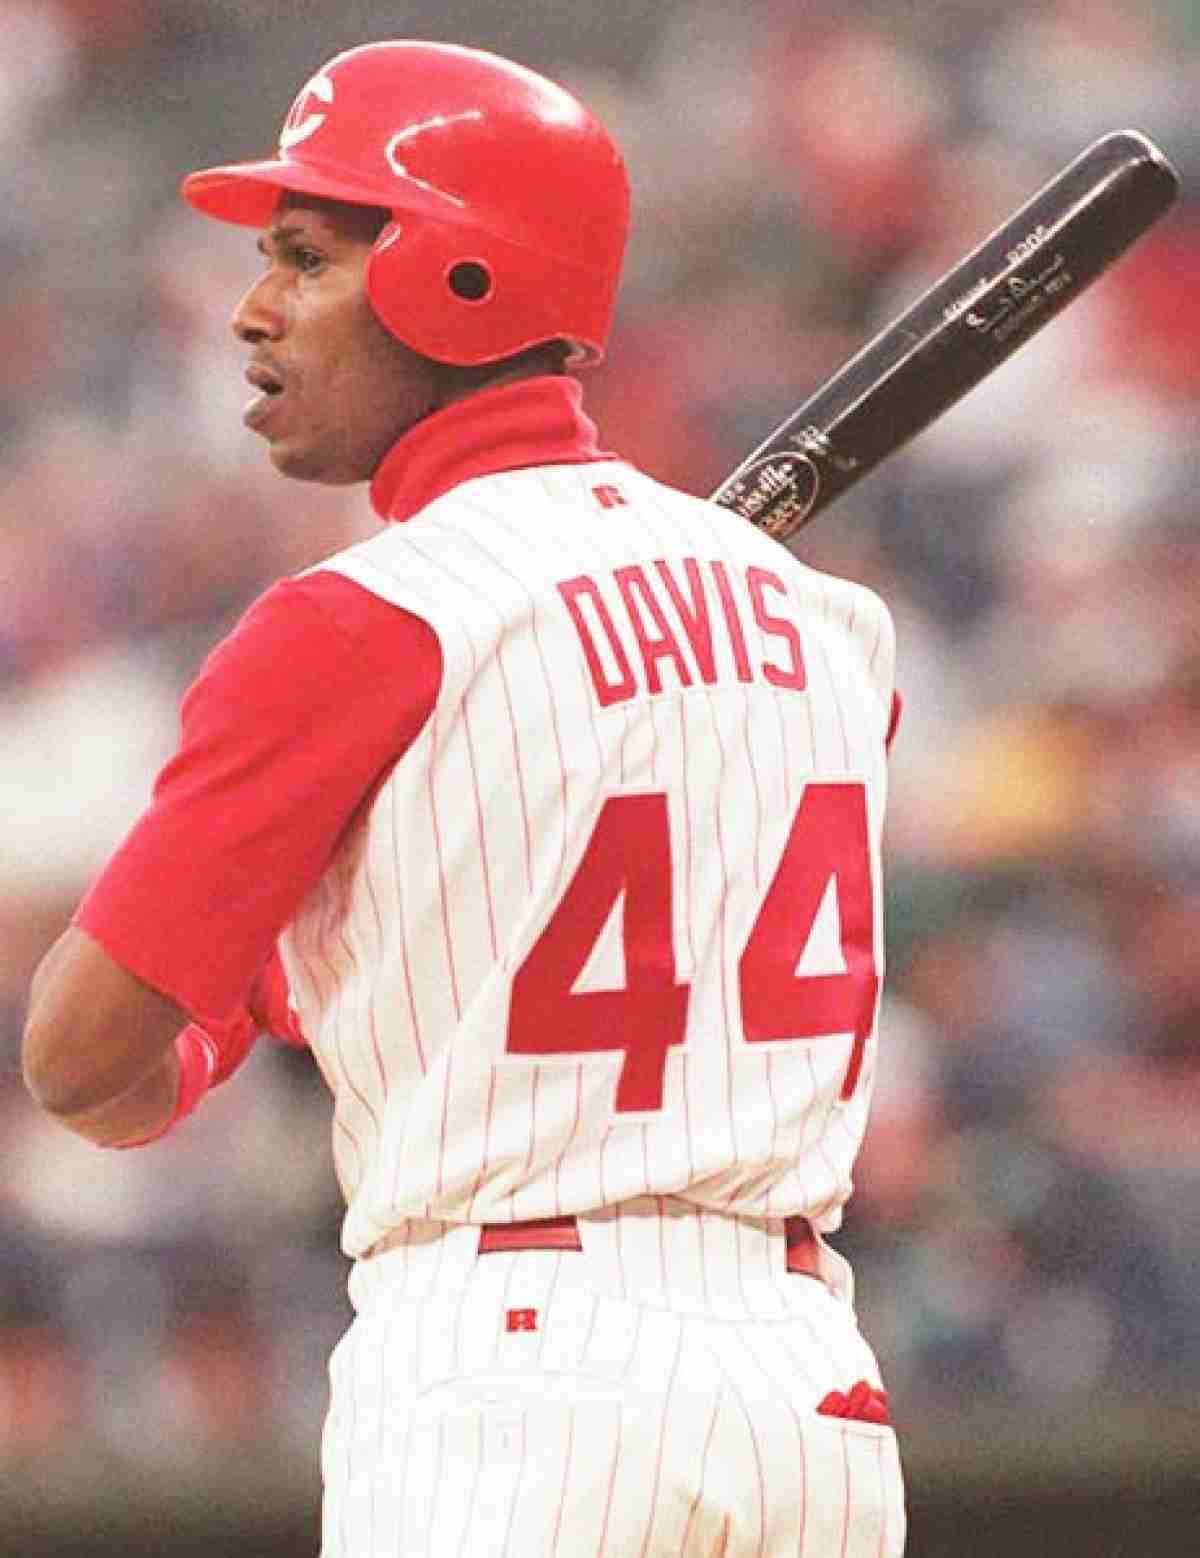 Not in Hall of Fame - 27. Eric Davis